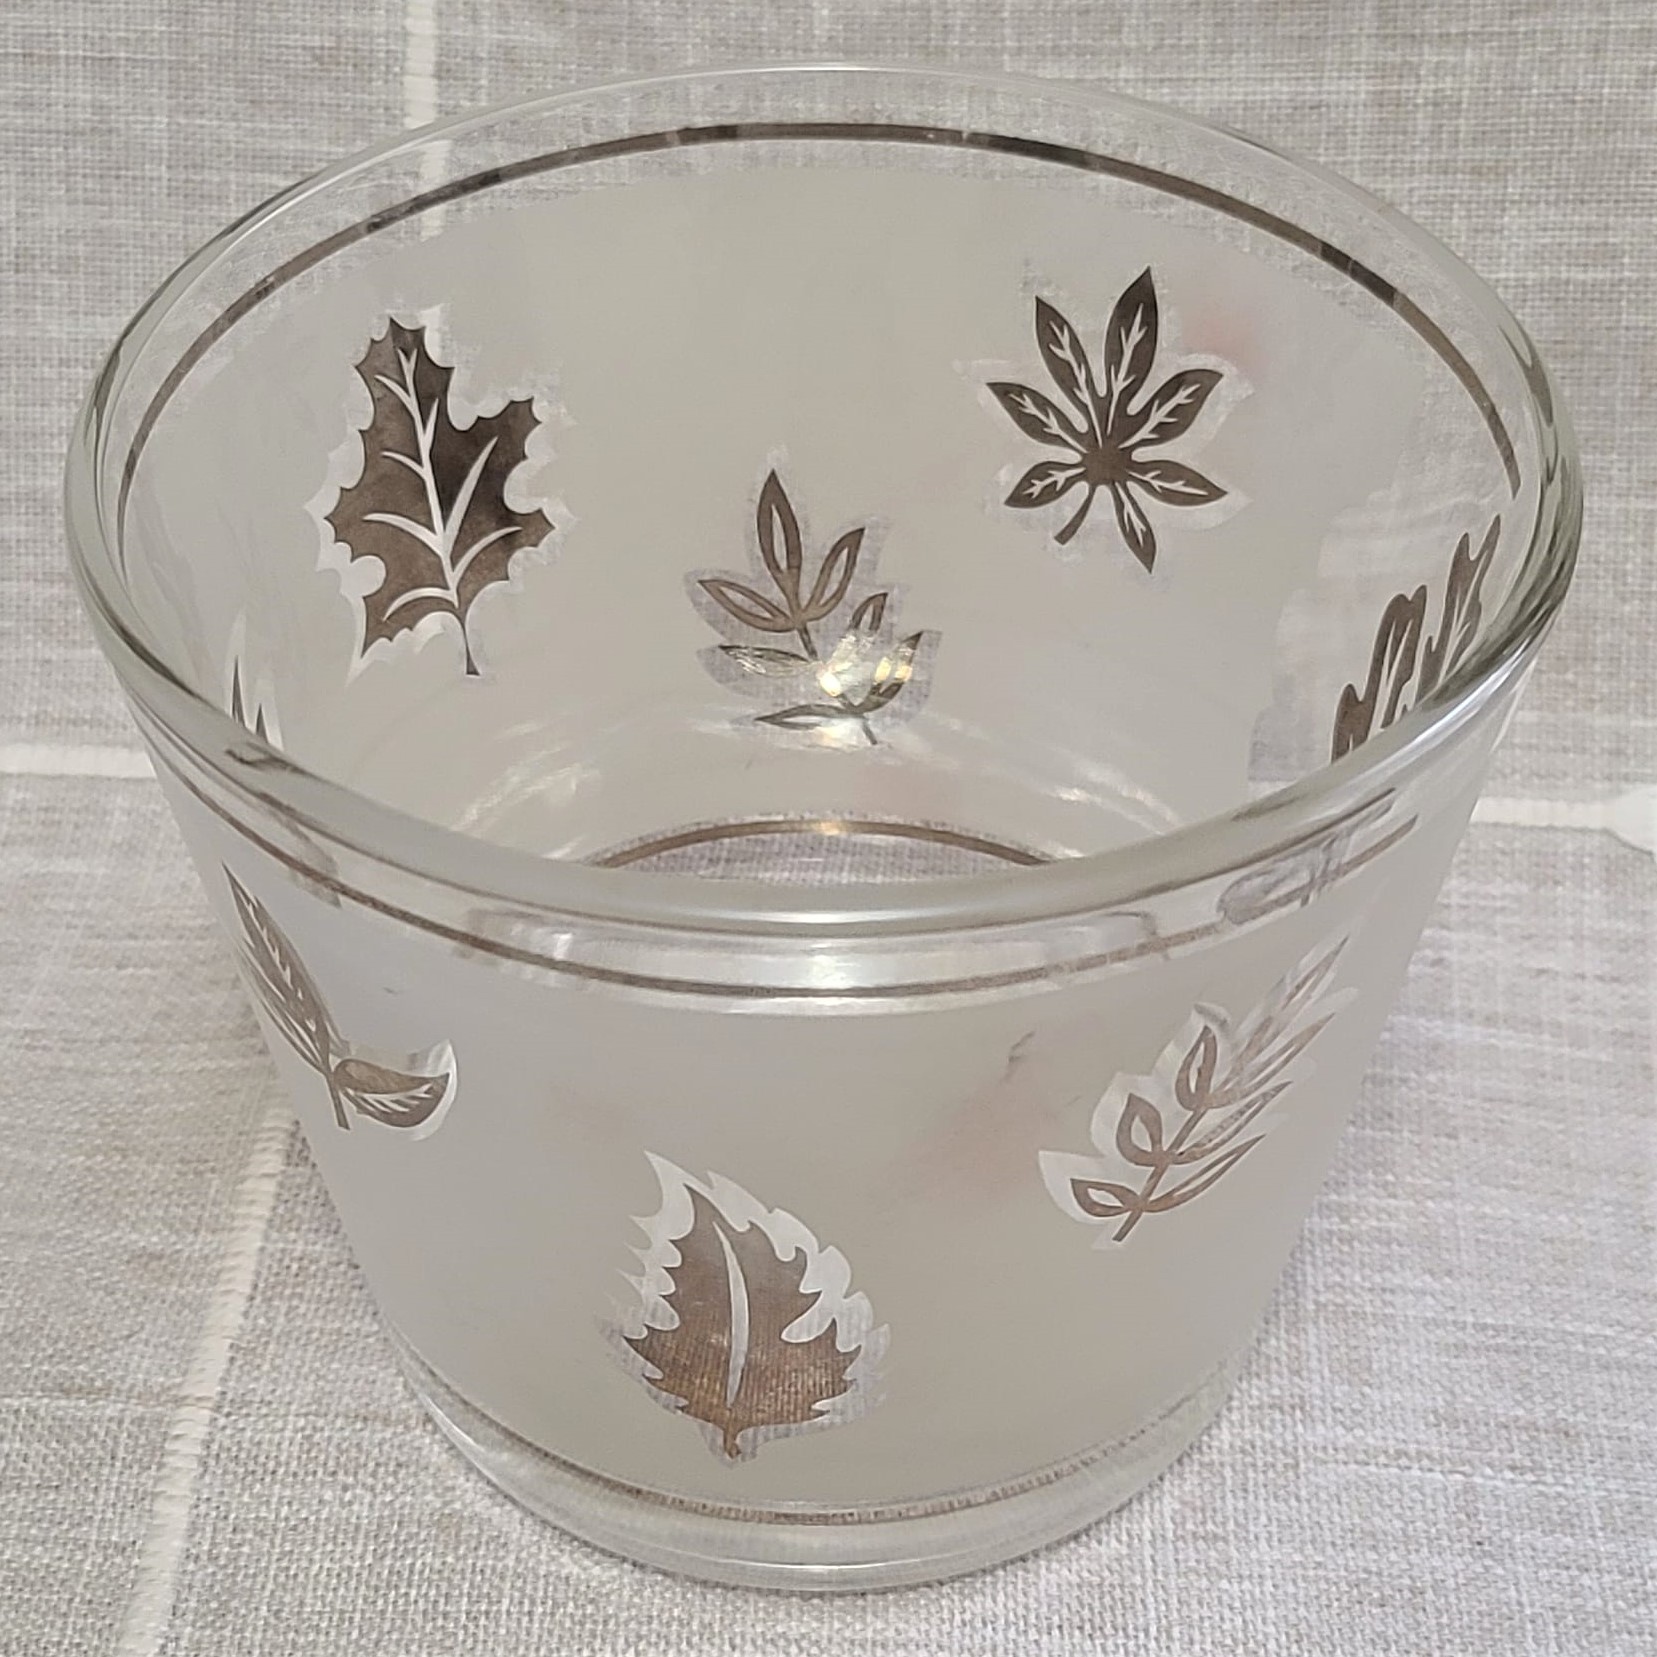 Libbey Handpainted Gold Leaf Frosted Glass Ice Bucket